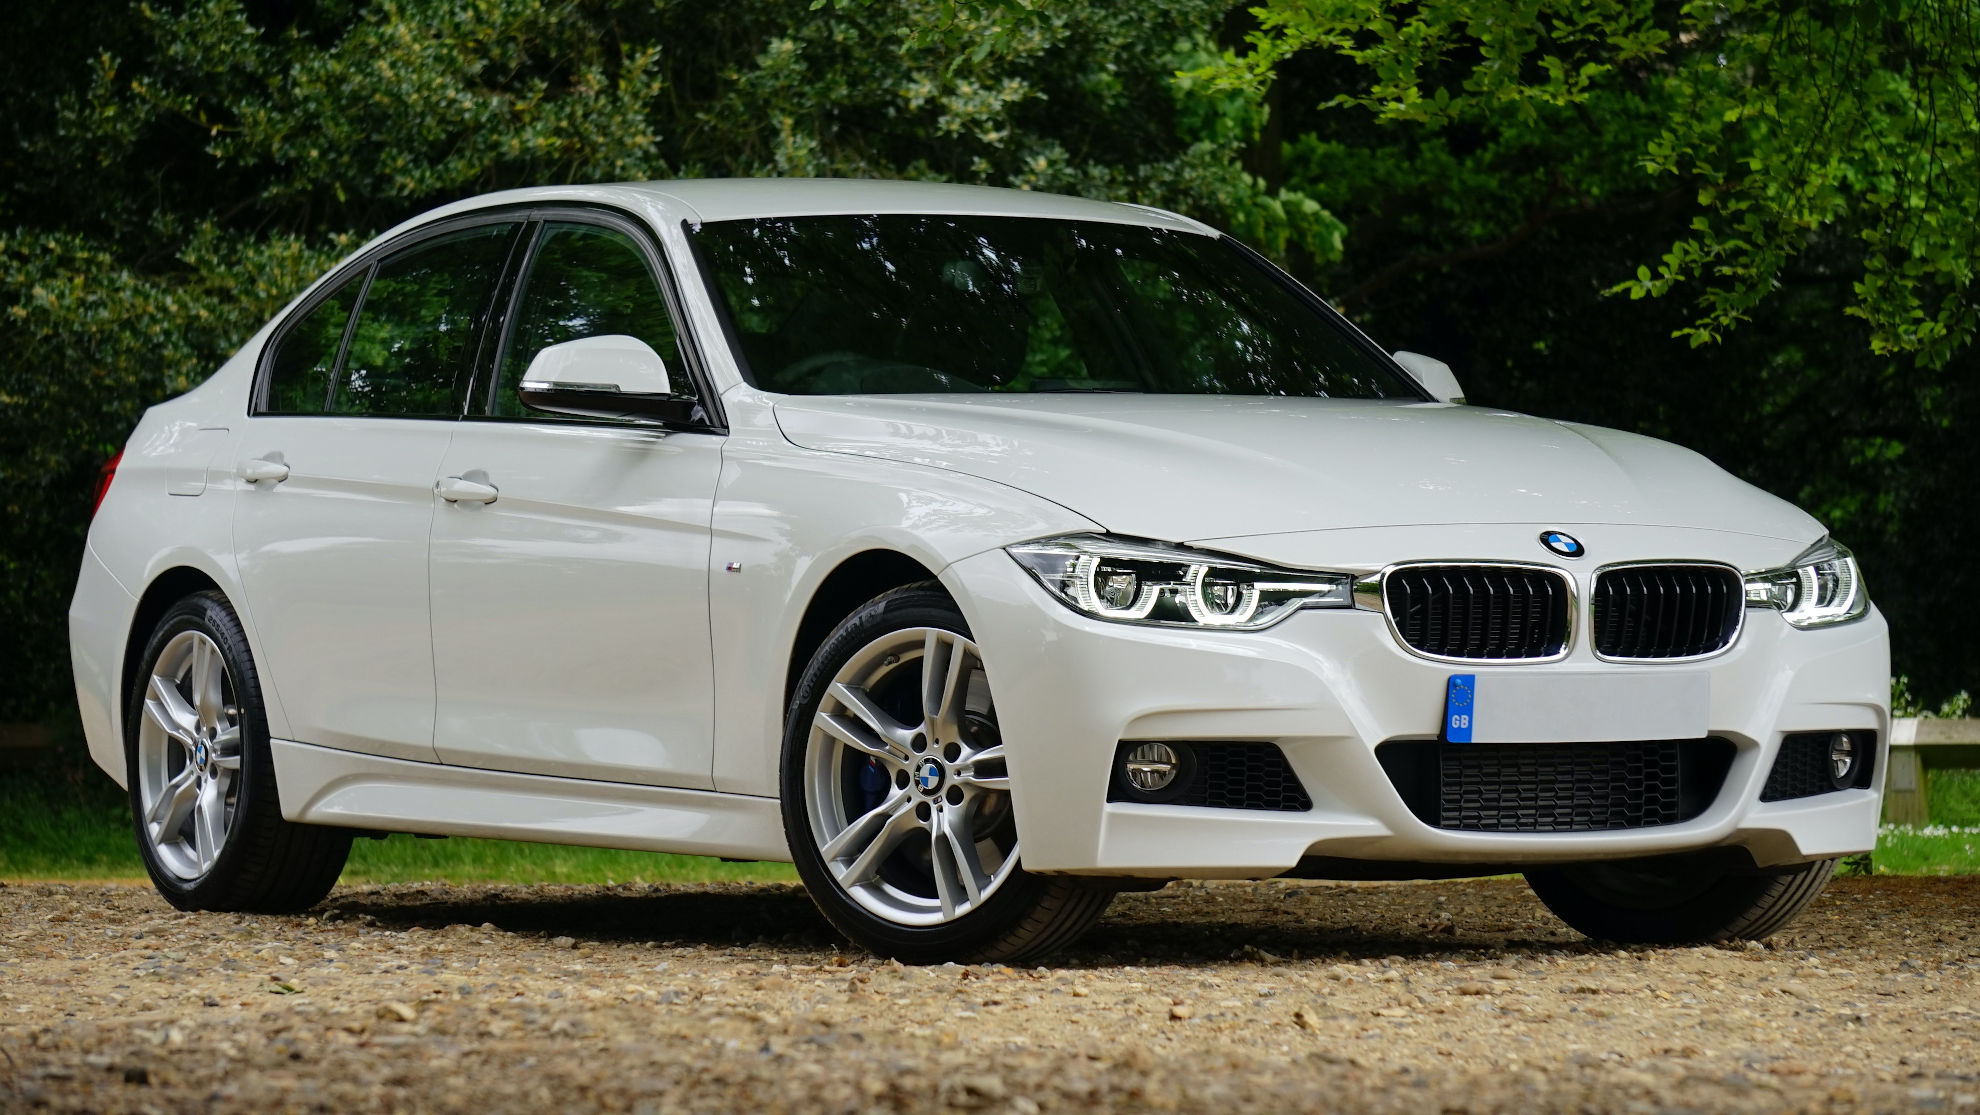 Cheap BMW Cars For Sale in Manchester